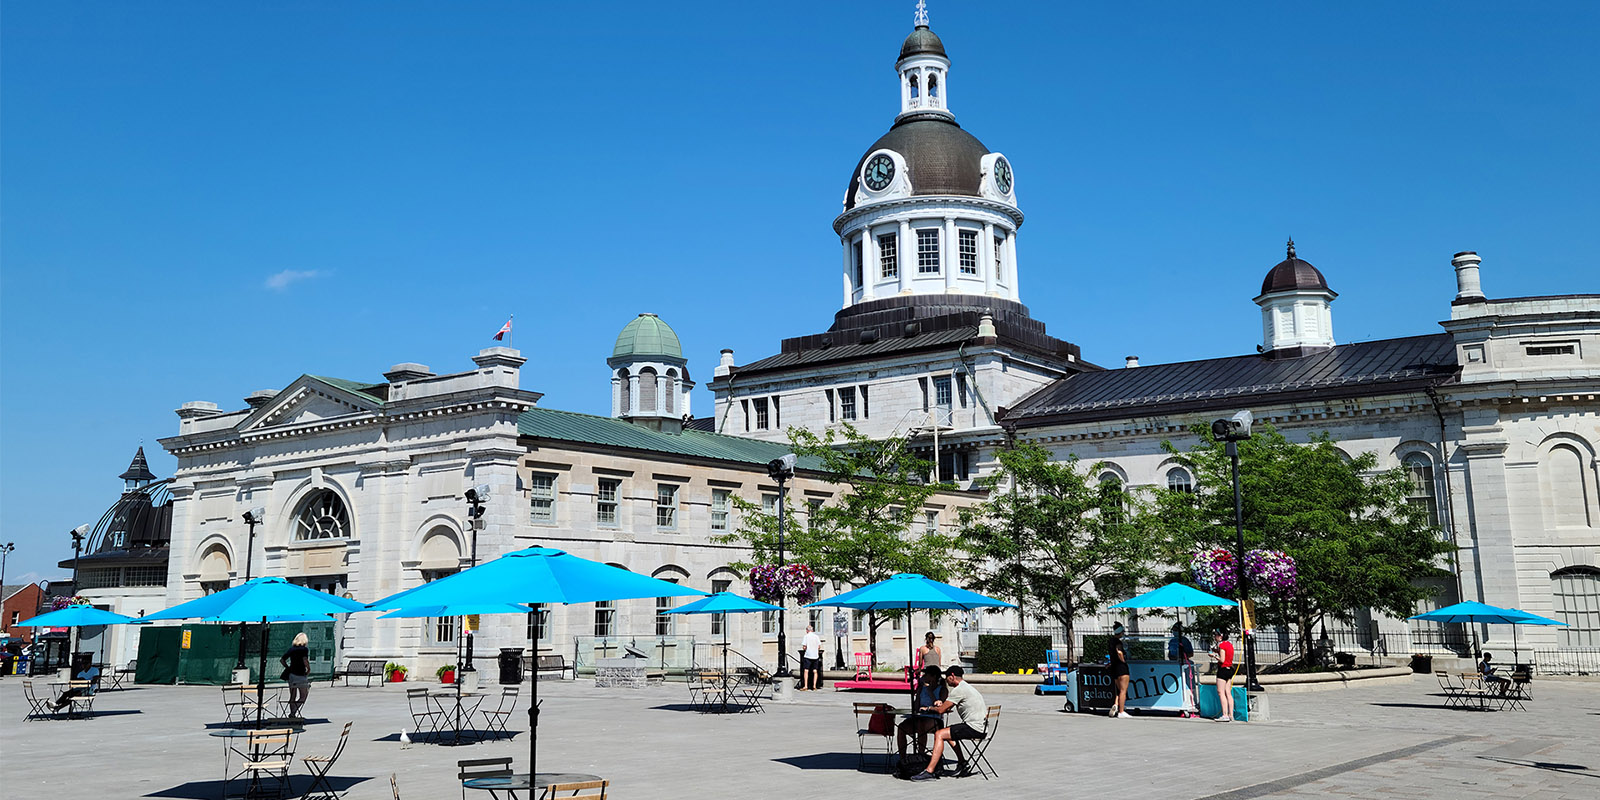 Kingston Market Square with umbrellas and tables on a sunny day